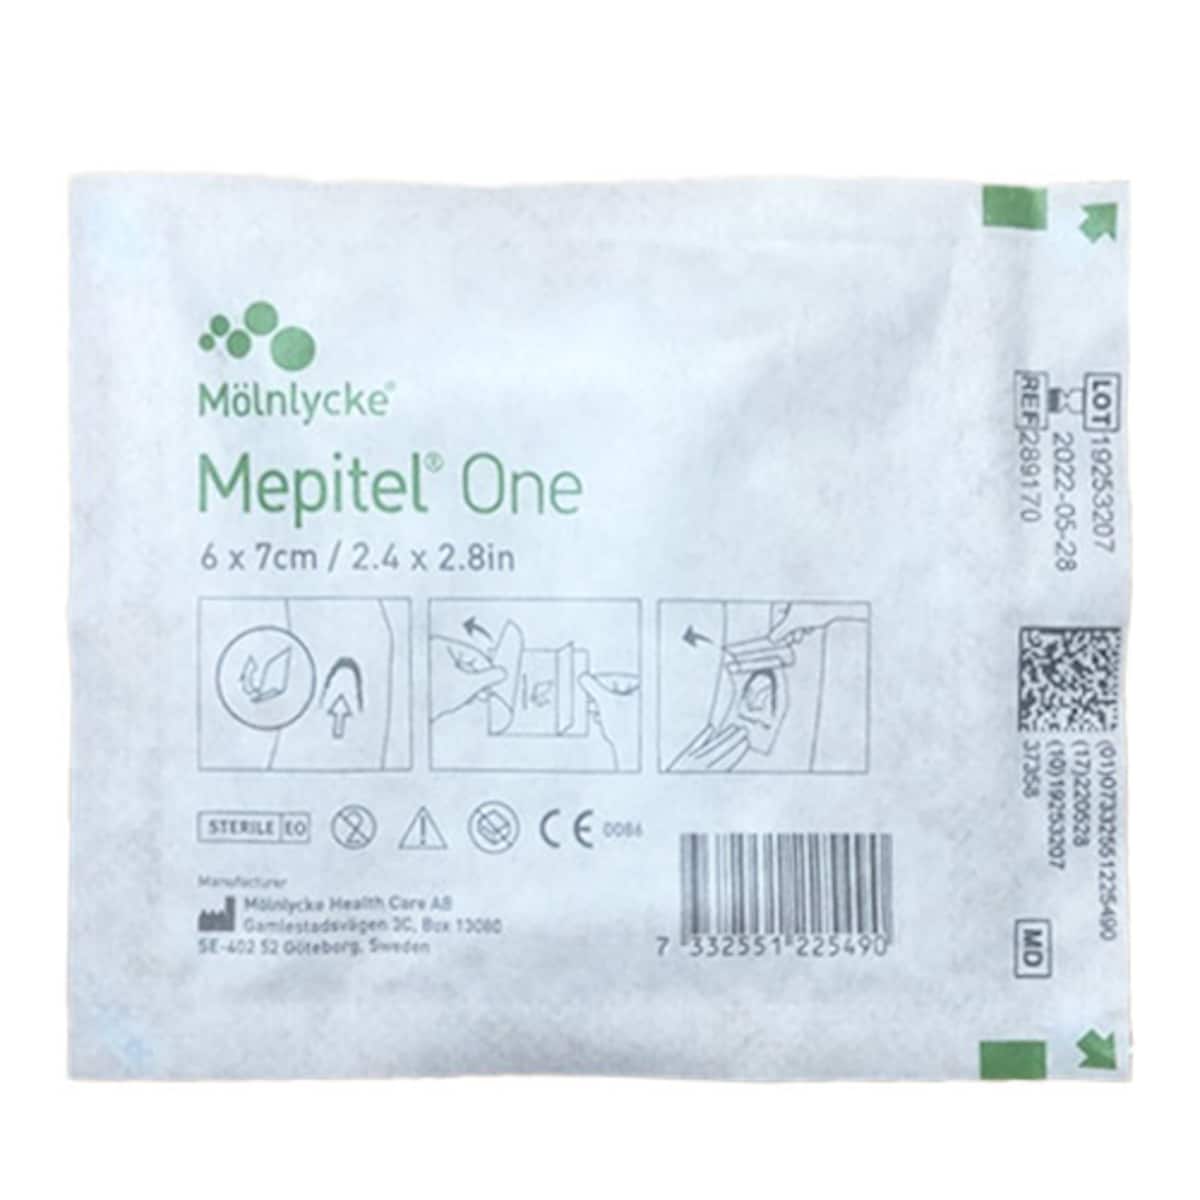 Mepitel One Soft Silicone Wound Contact Layer 289170 6cm x 7cm Single